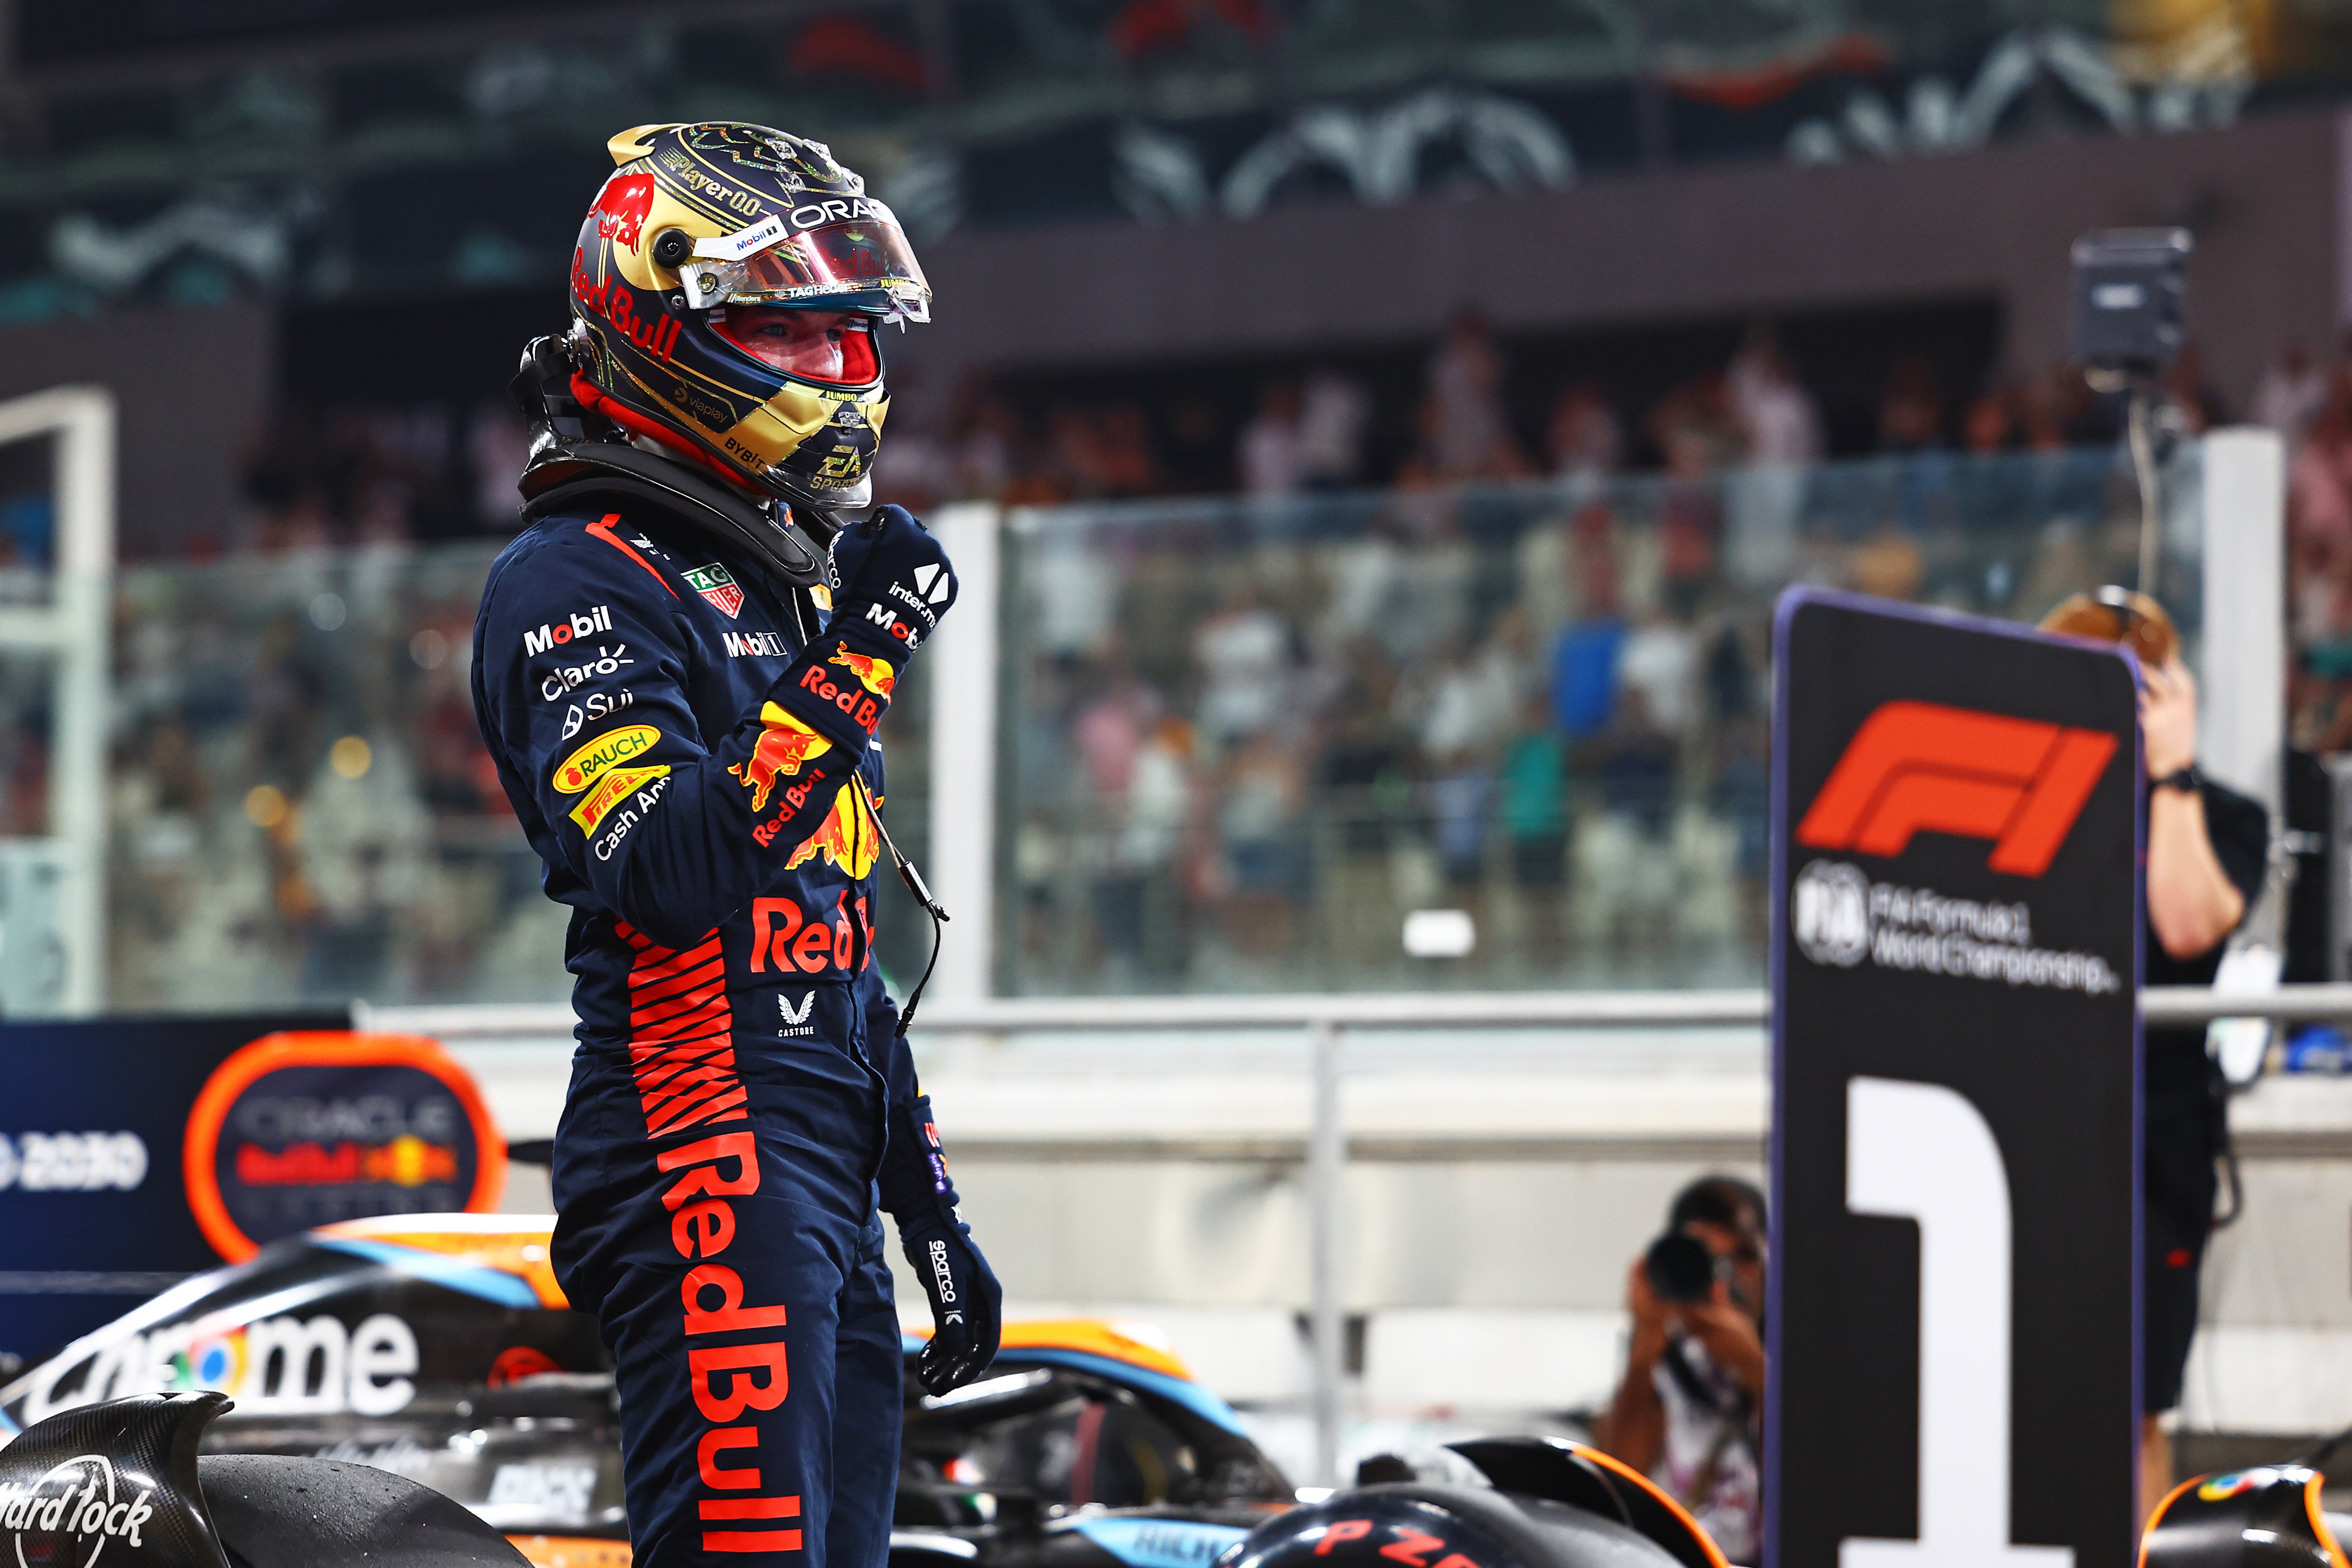 Max Verstappen secured his 12th pole position of the season